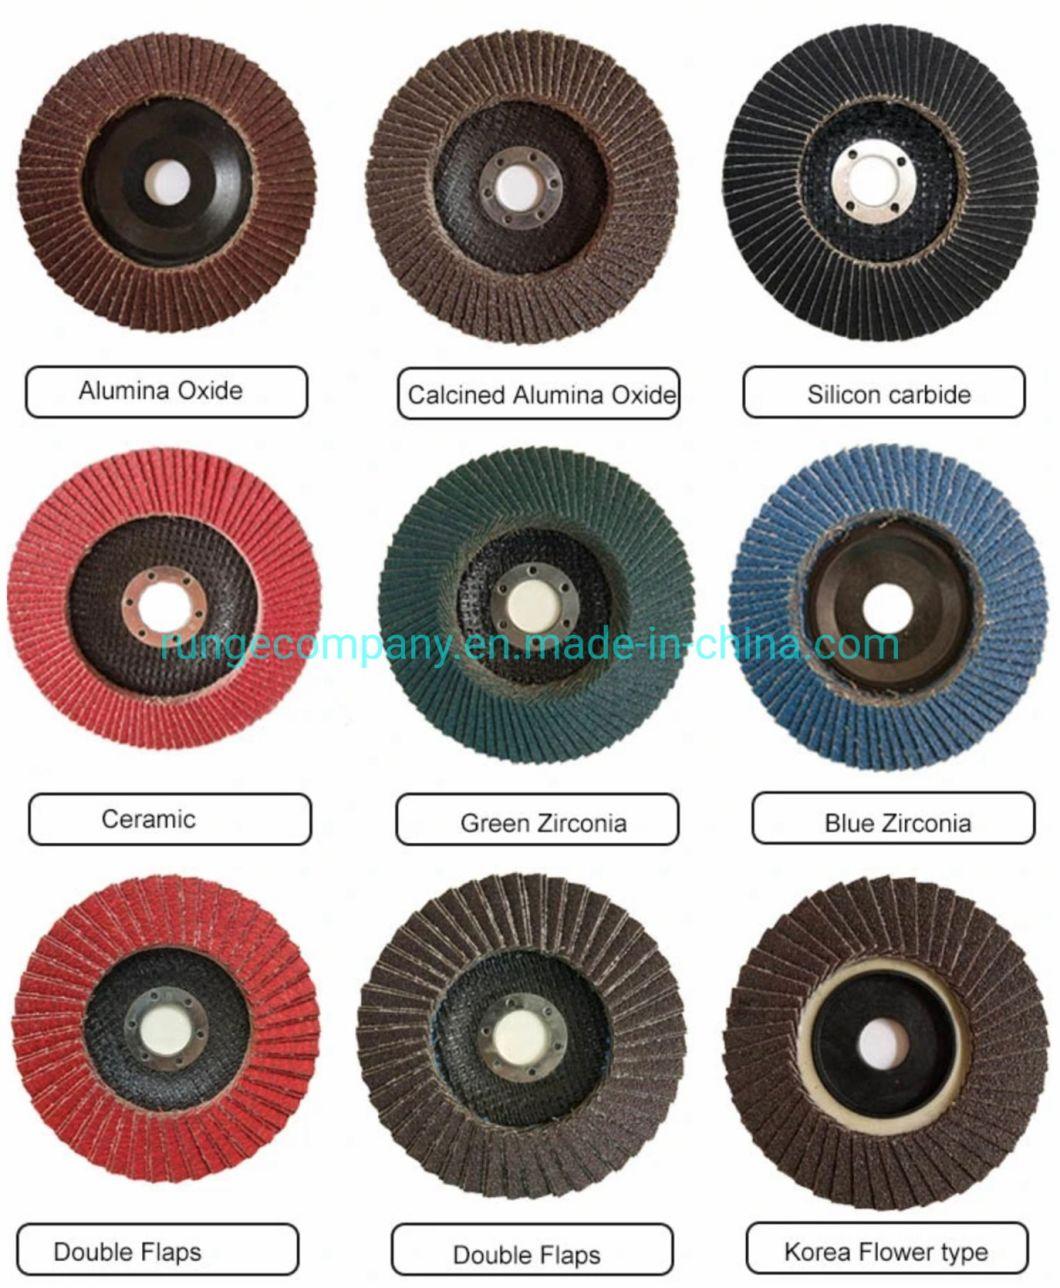 Power Electric Tools Accessories Premium Cut off Cutting Disc Wheels 14" for Metal and Stainless Steel Works